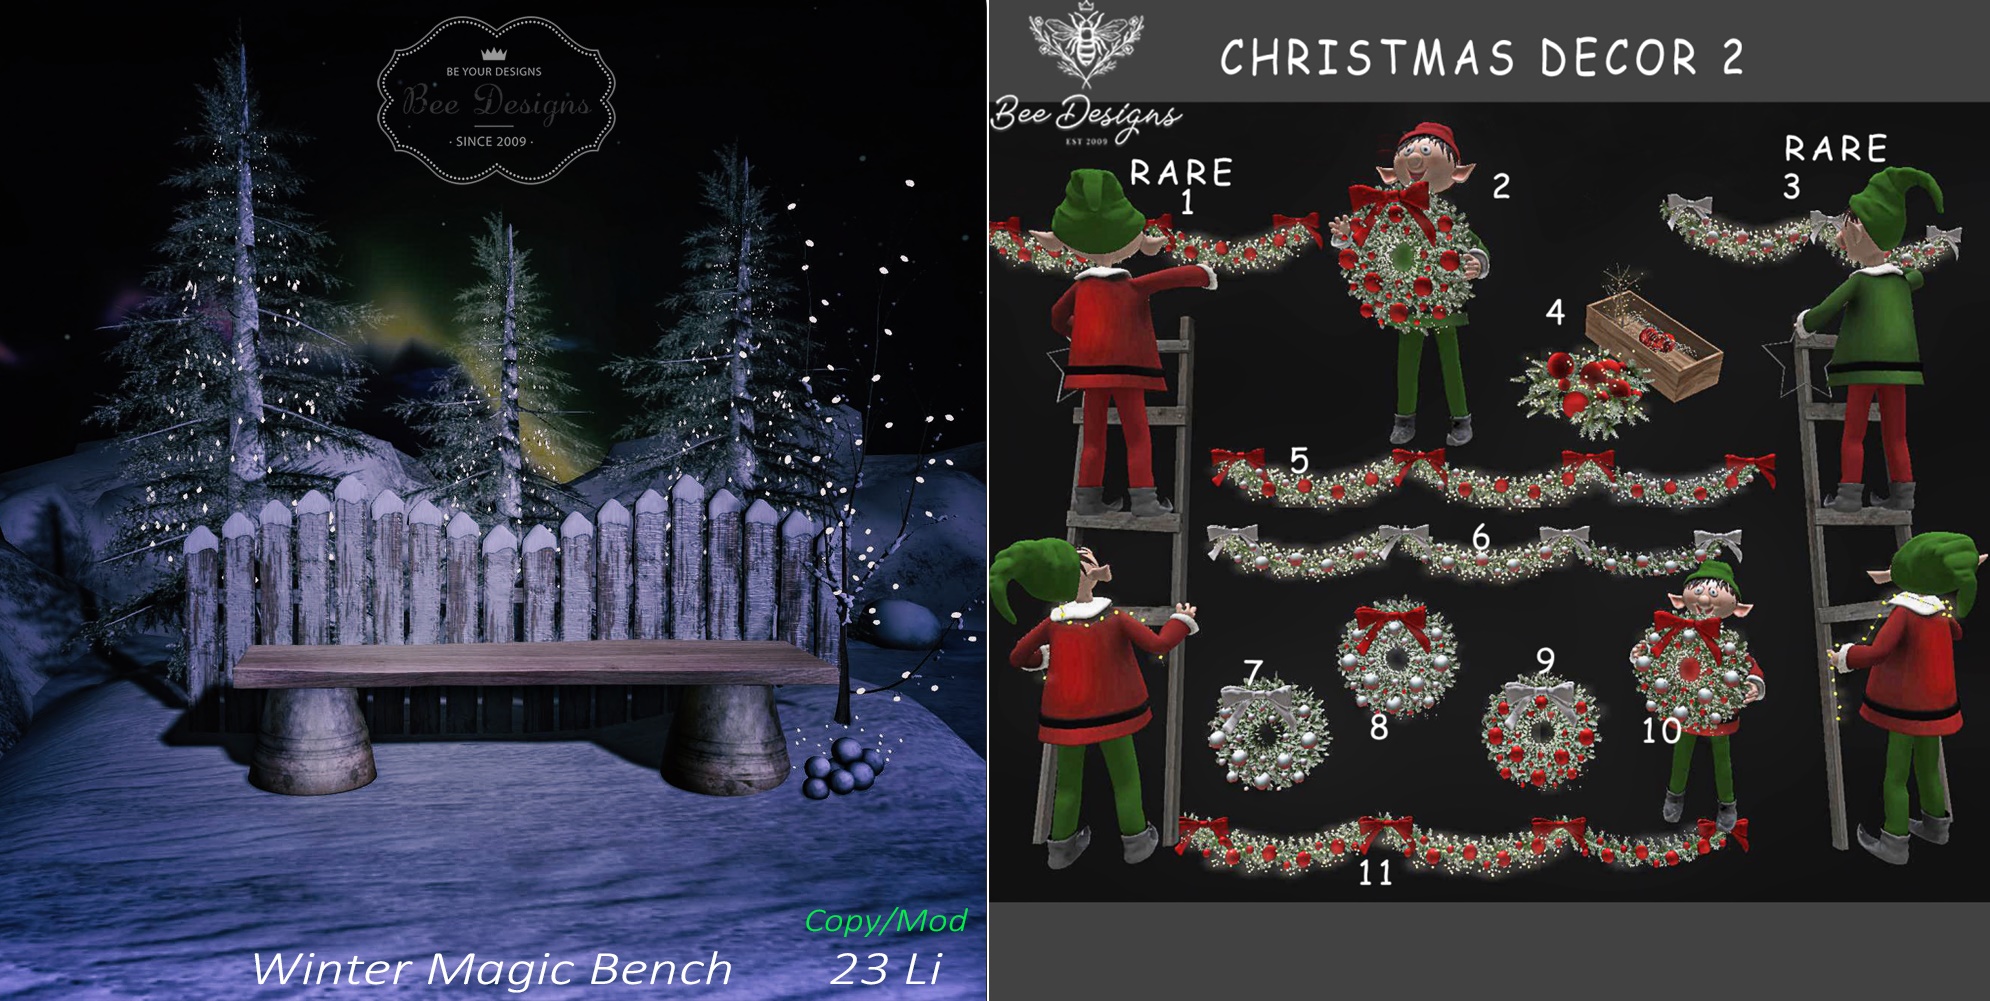 Bee Designs – Winter Magic Bench and Christmas Decor 2